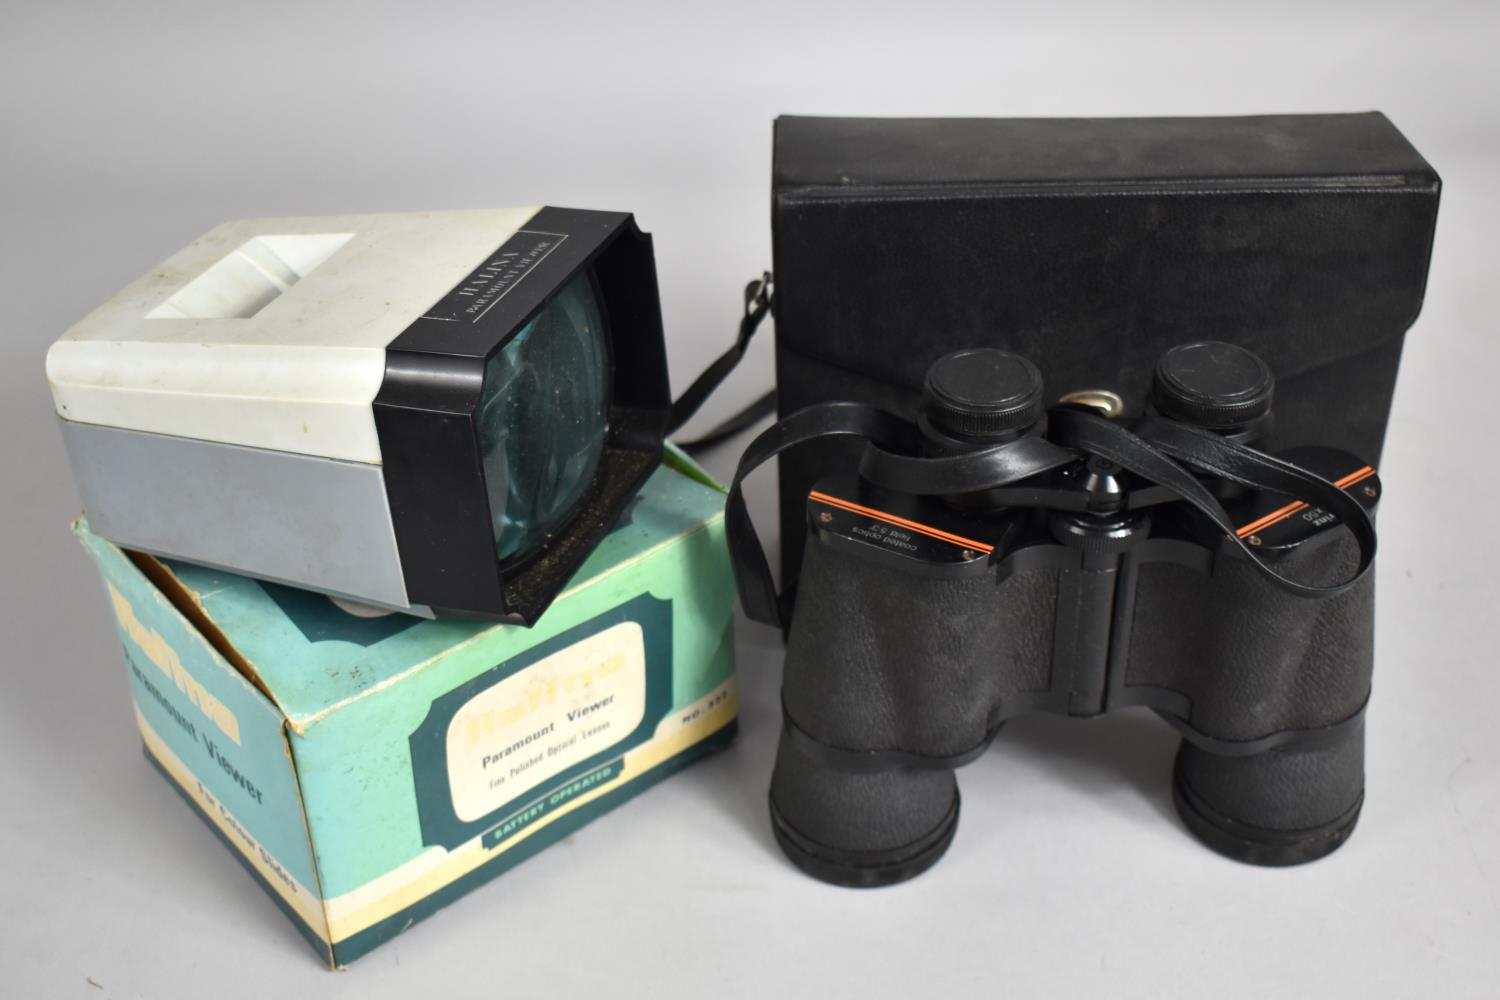 A Boxed Pair of Prinz 10x50 Binoculars together with a Halina Slide Projector